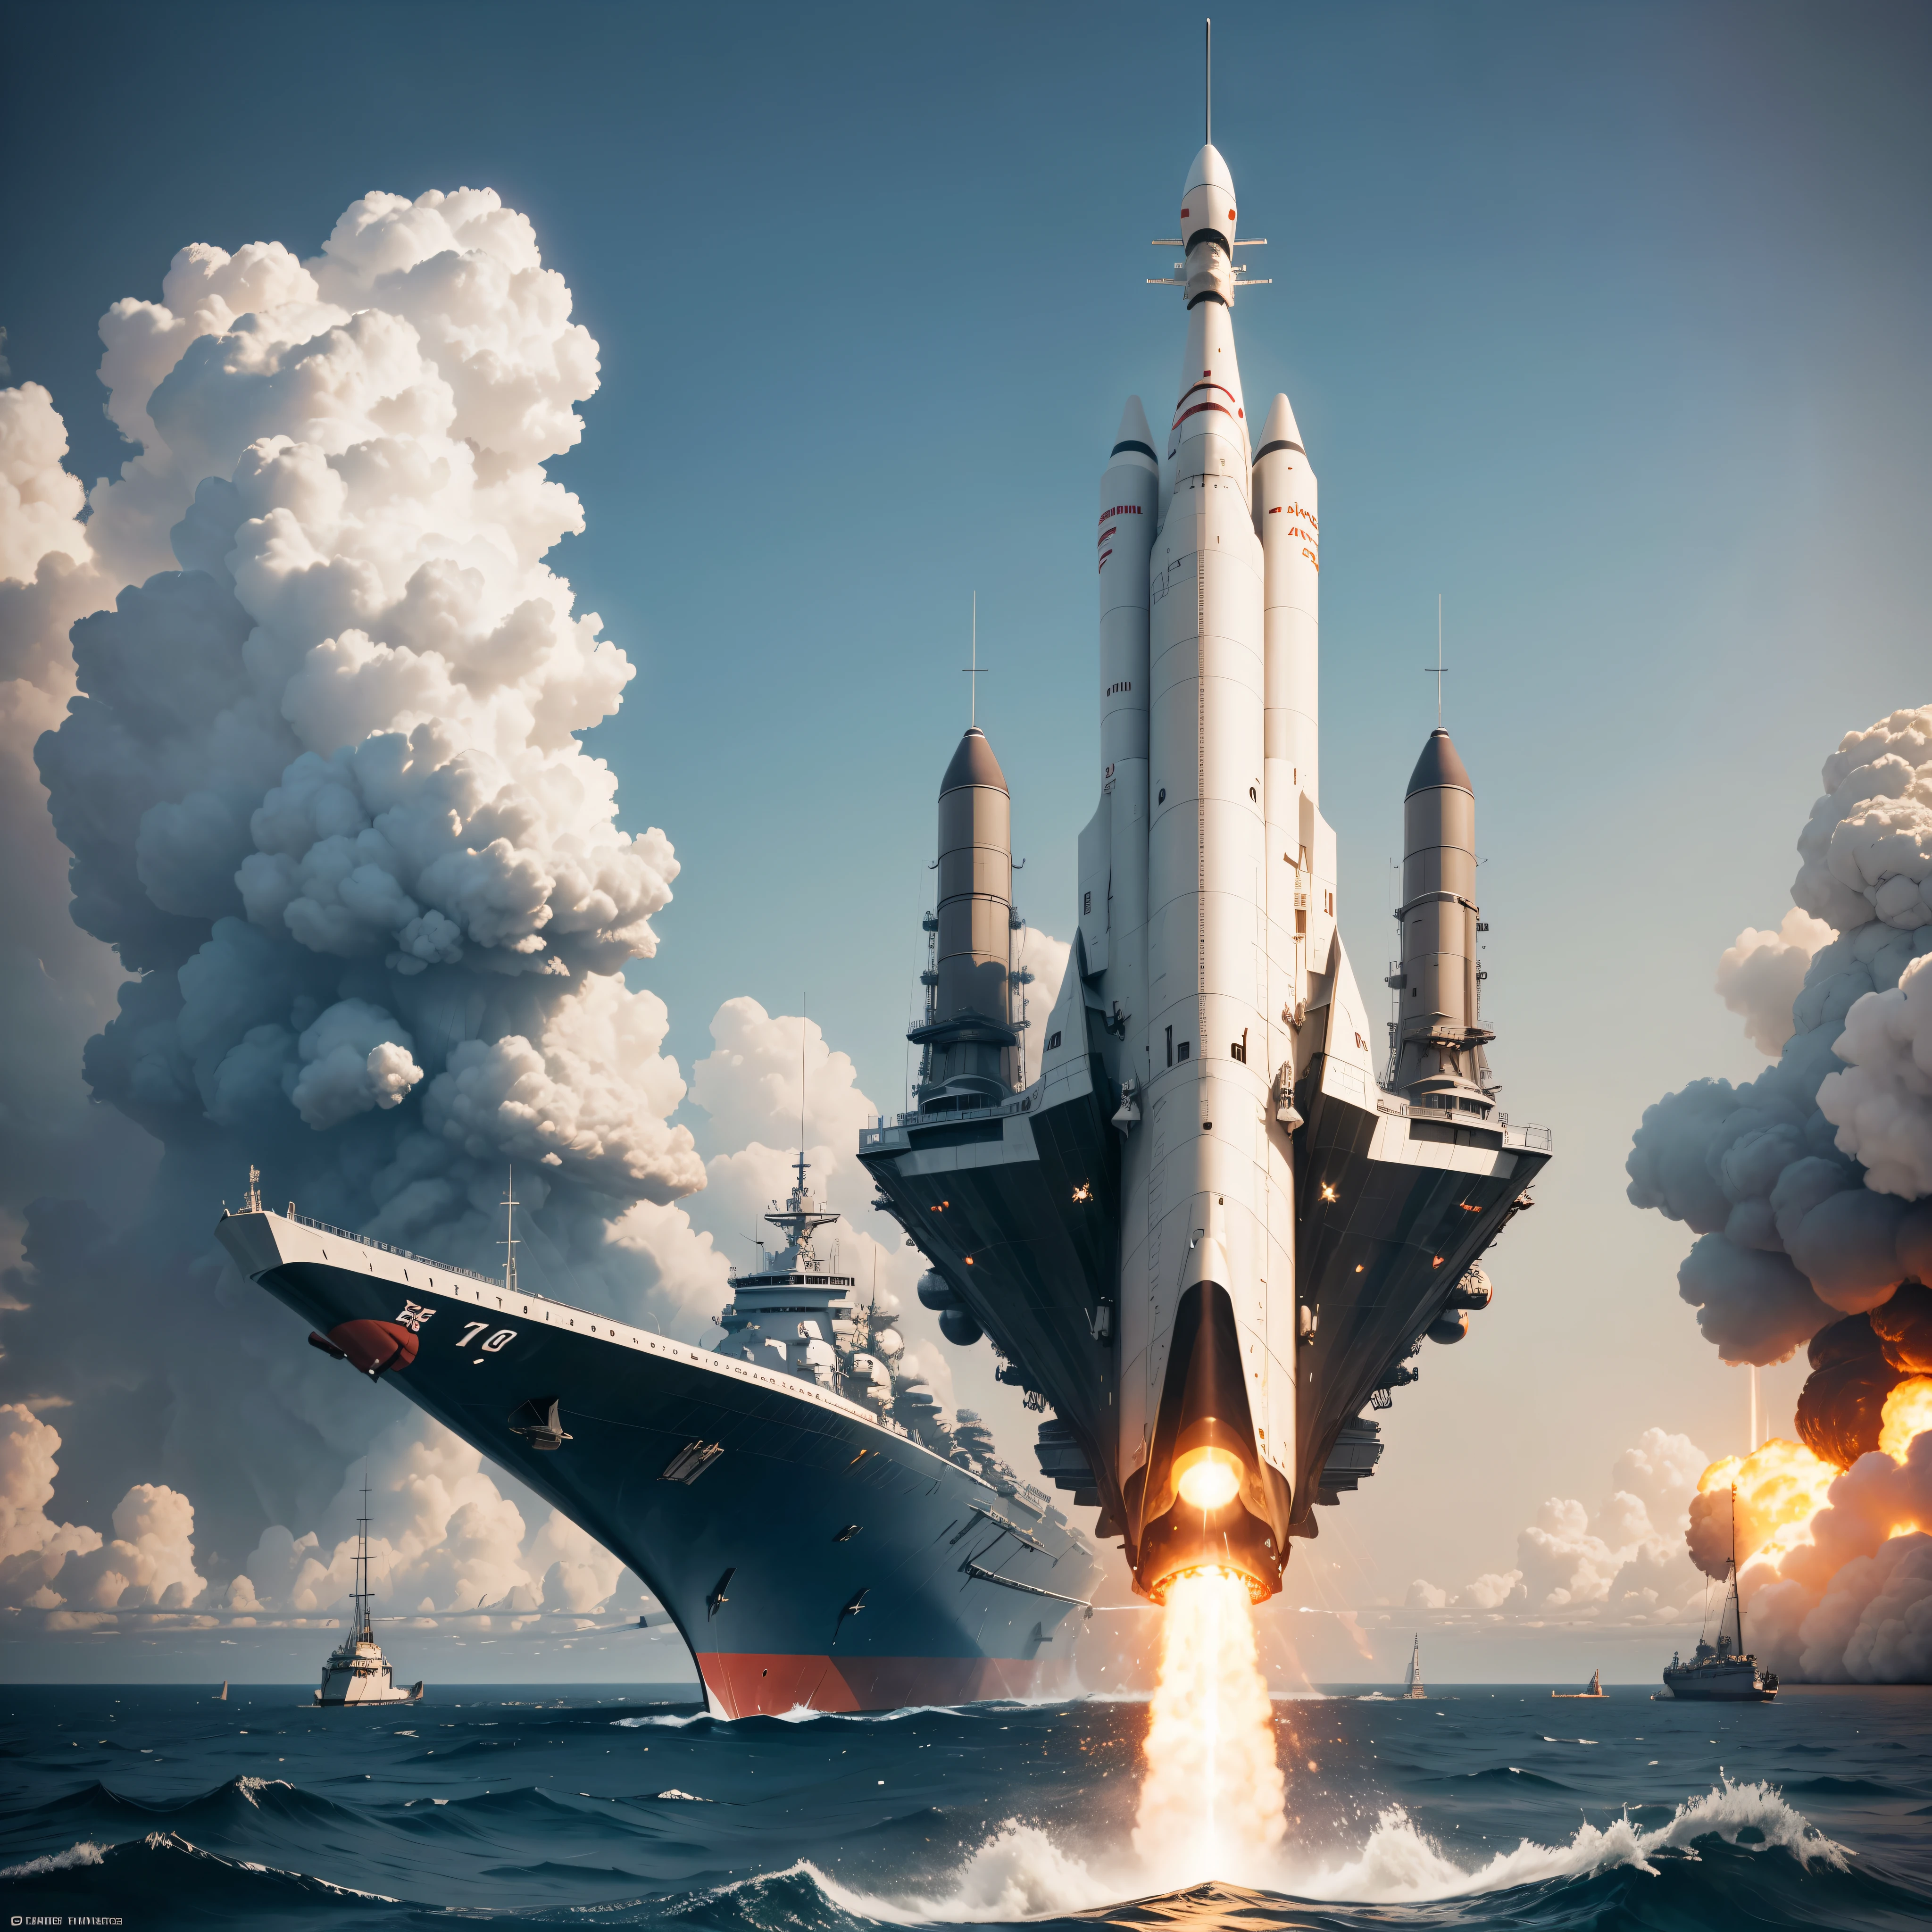 best quality,highres,(realistic:1.37) painting of a government secret space mission,sci-fi,space exploration, astronauts in spacesuits, space shuttle lifting off, satellite deployment, mission control center, earth in the background, stars and galaxies, vivid colors, studio lighting, intense focus, detailed spaceship engines, futuristic technology, mysterious atmosphere, surreal space landscapes, epic space battles, interstellar travel